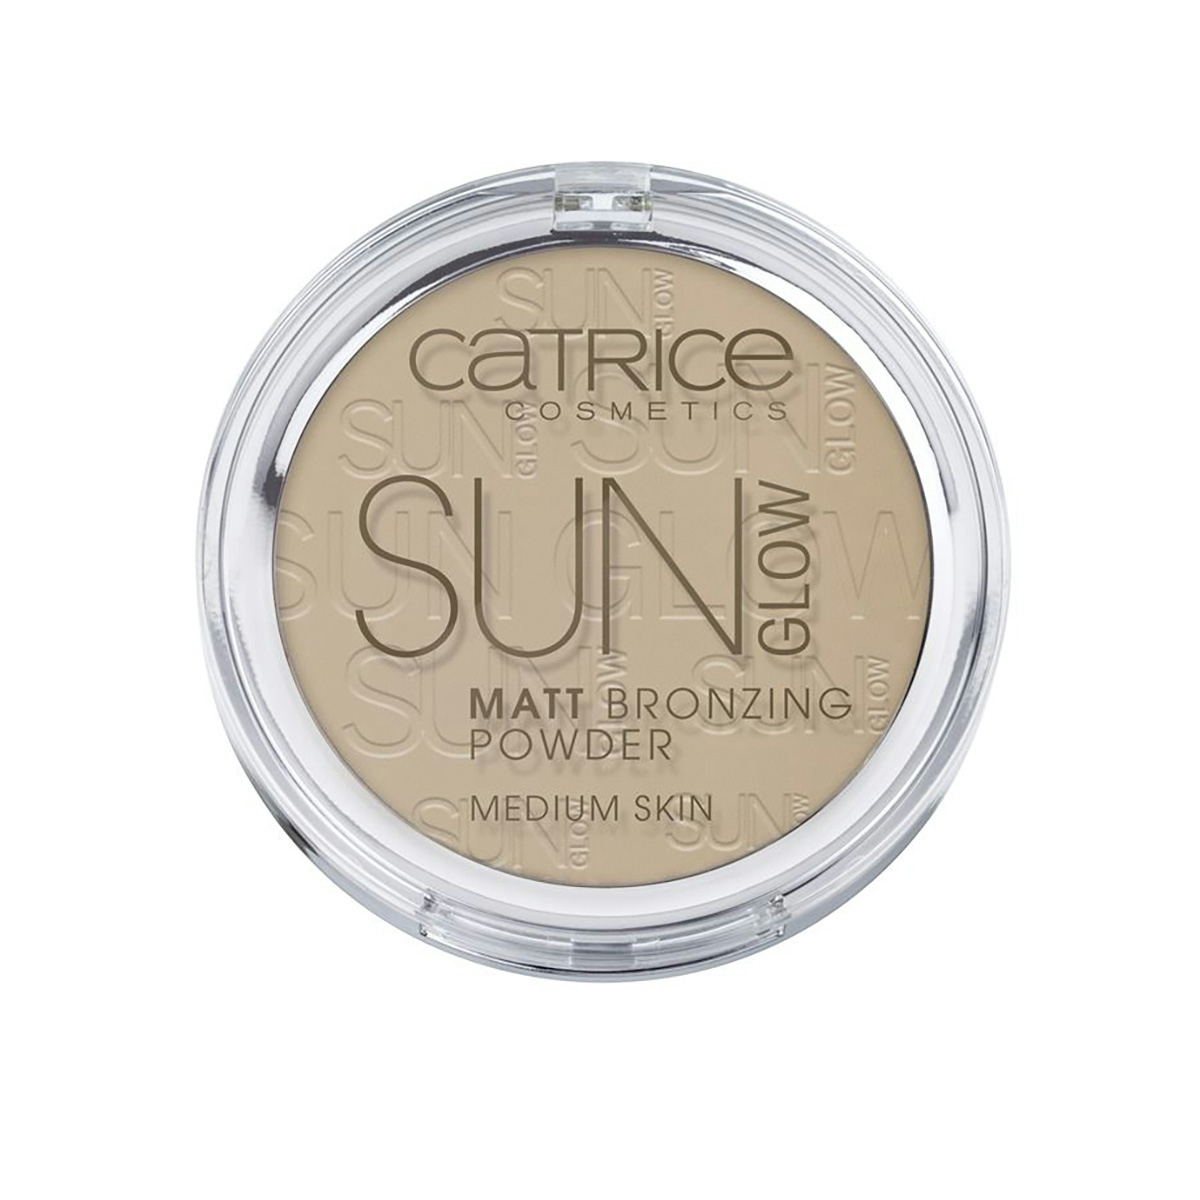 Polvos bronceadores MATE 30 CATRICE 1 ud